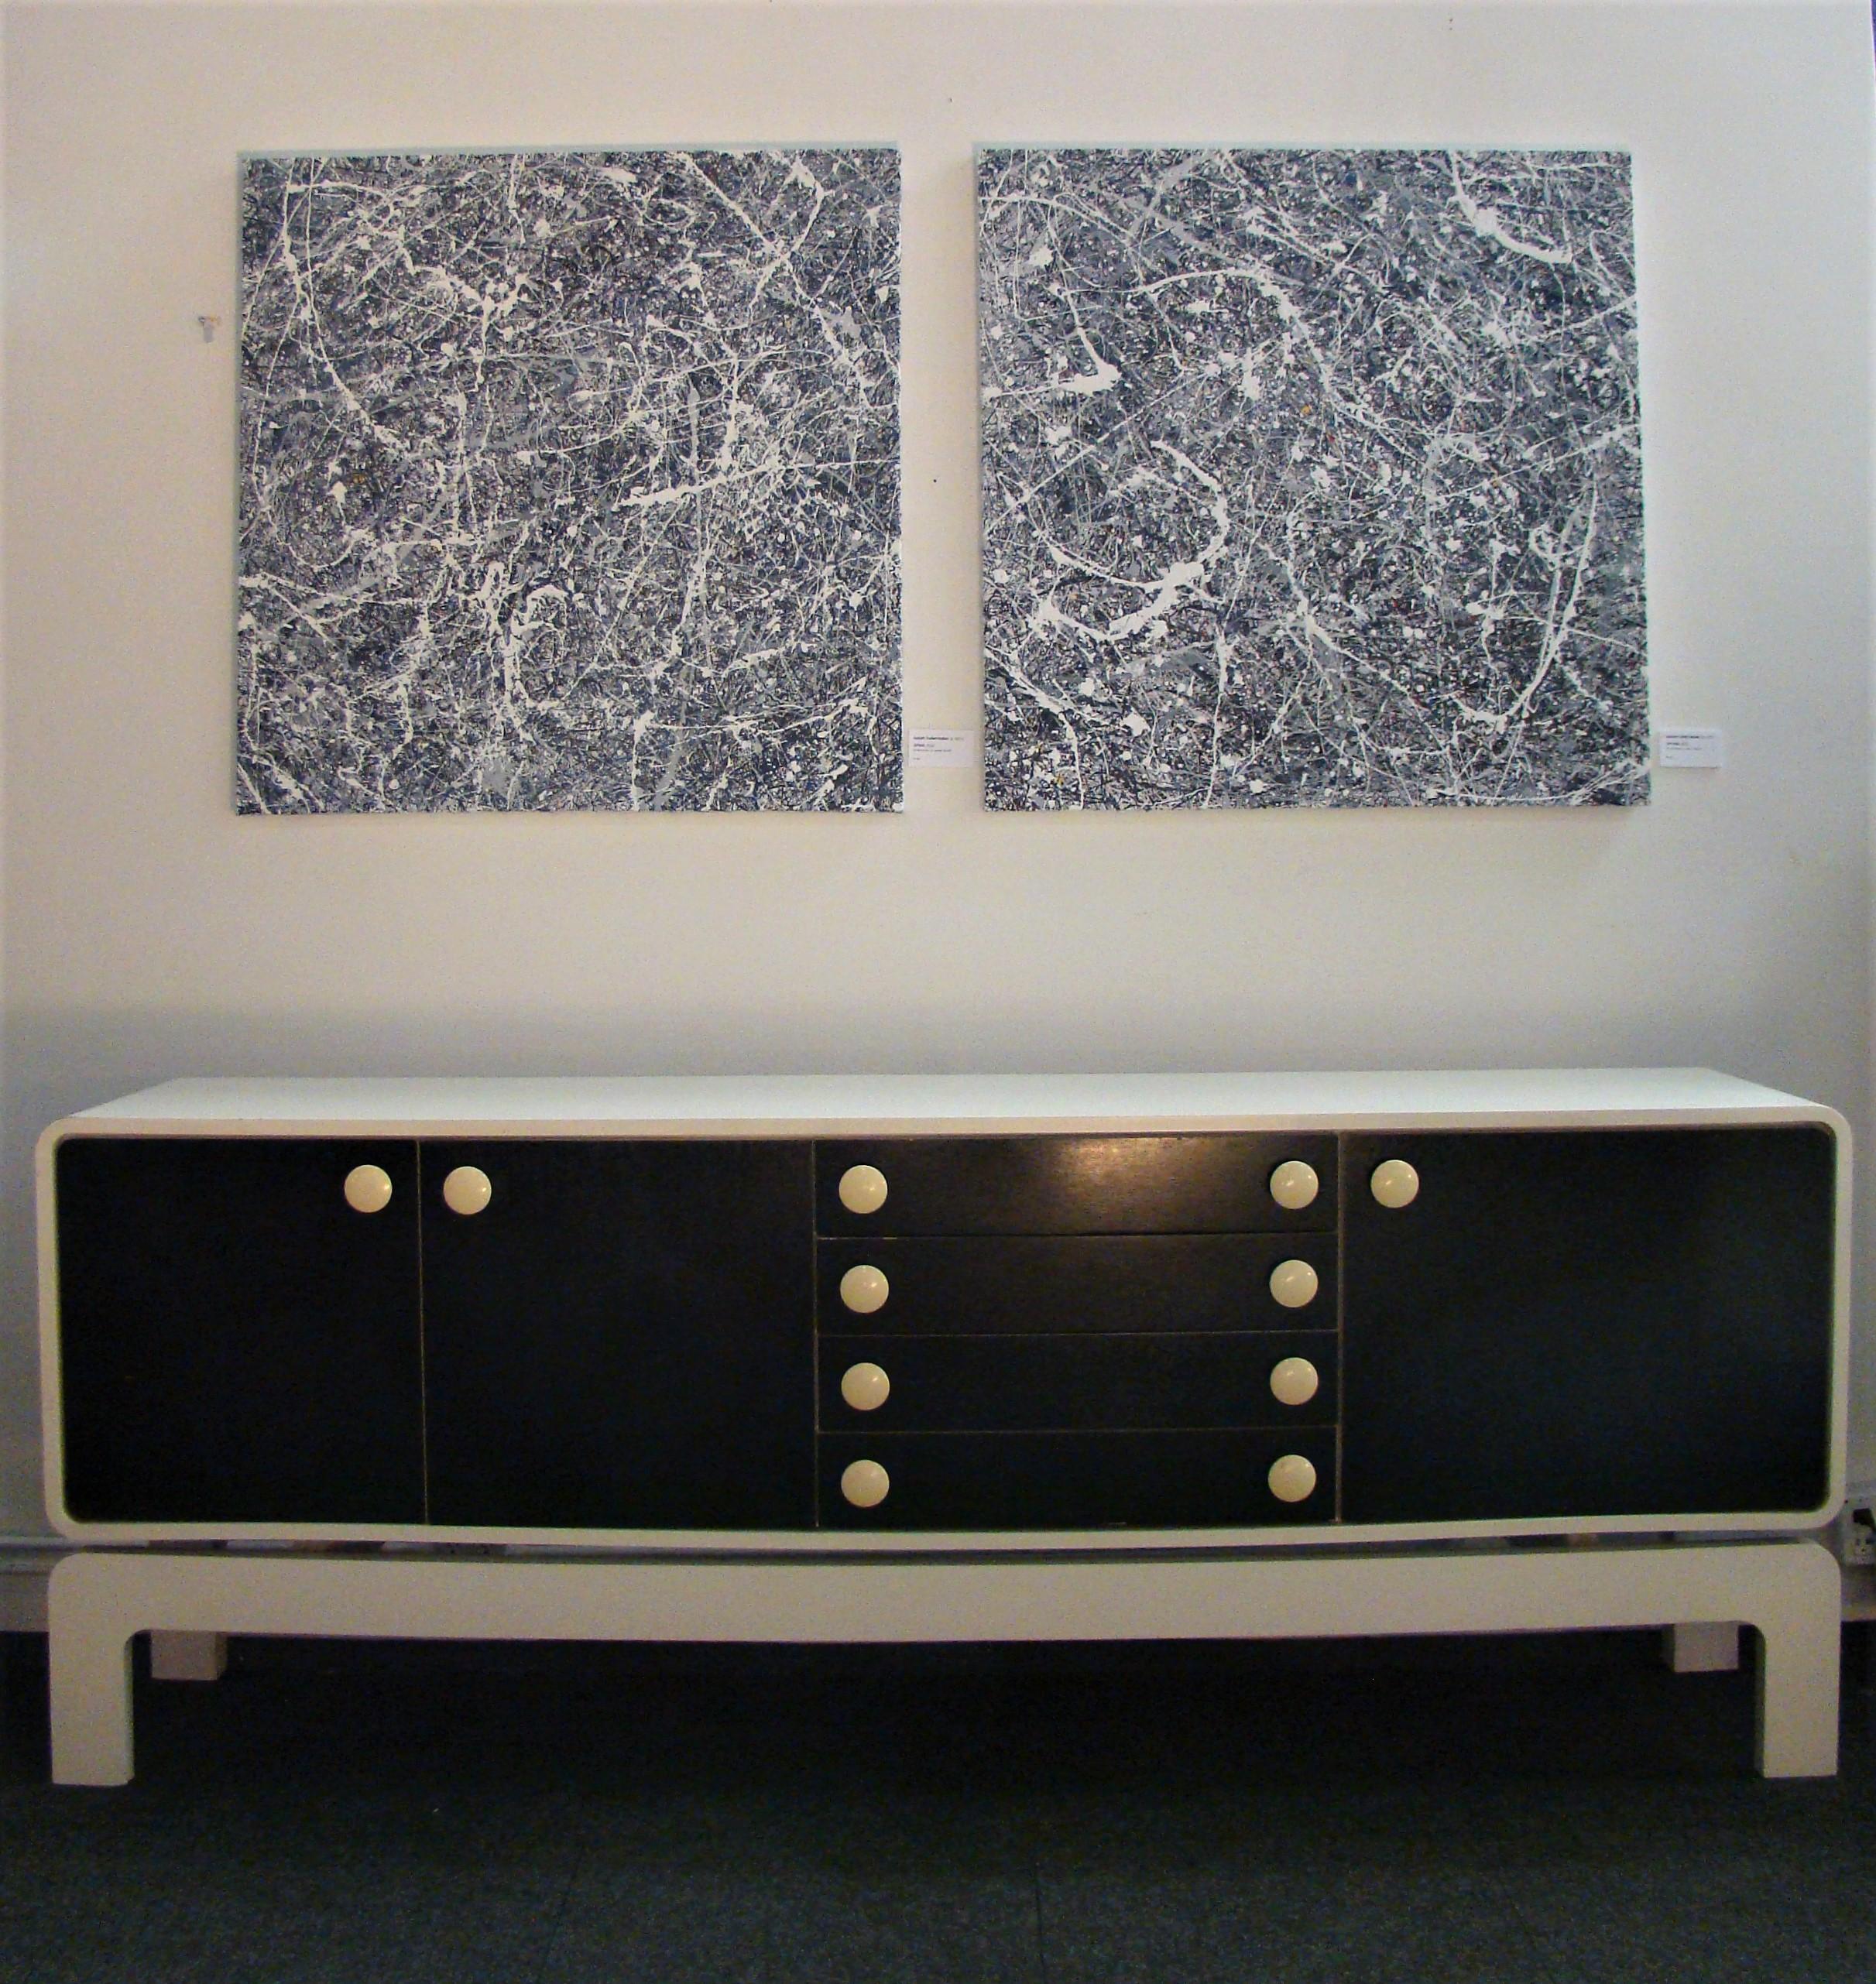 Large 1970s white enameled credenza/sideboard by Danish modernist design firm softline. Decorative and very graphic, the 